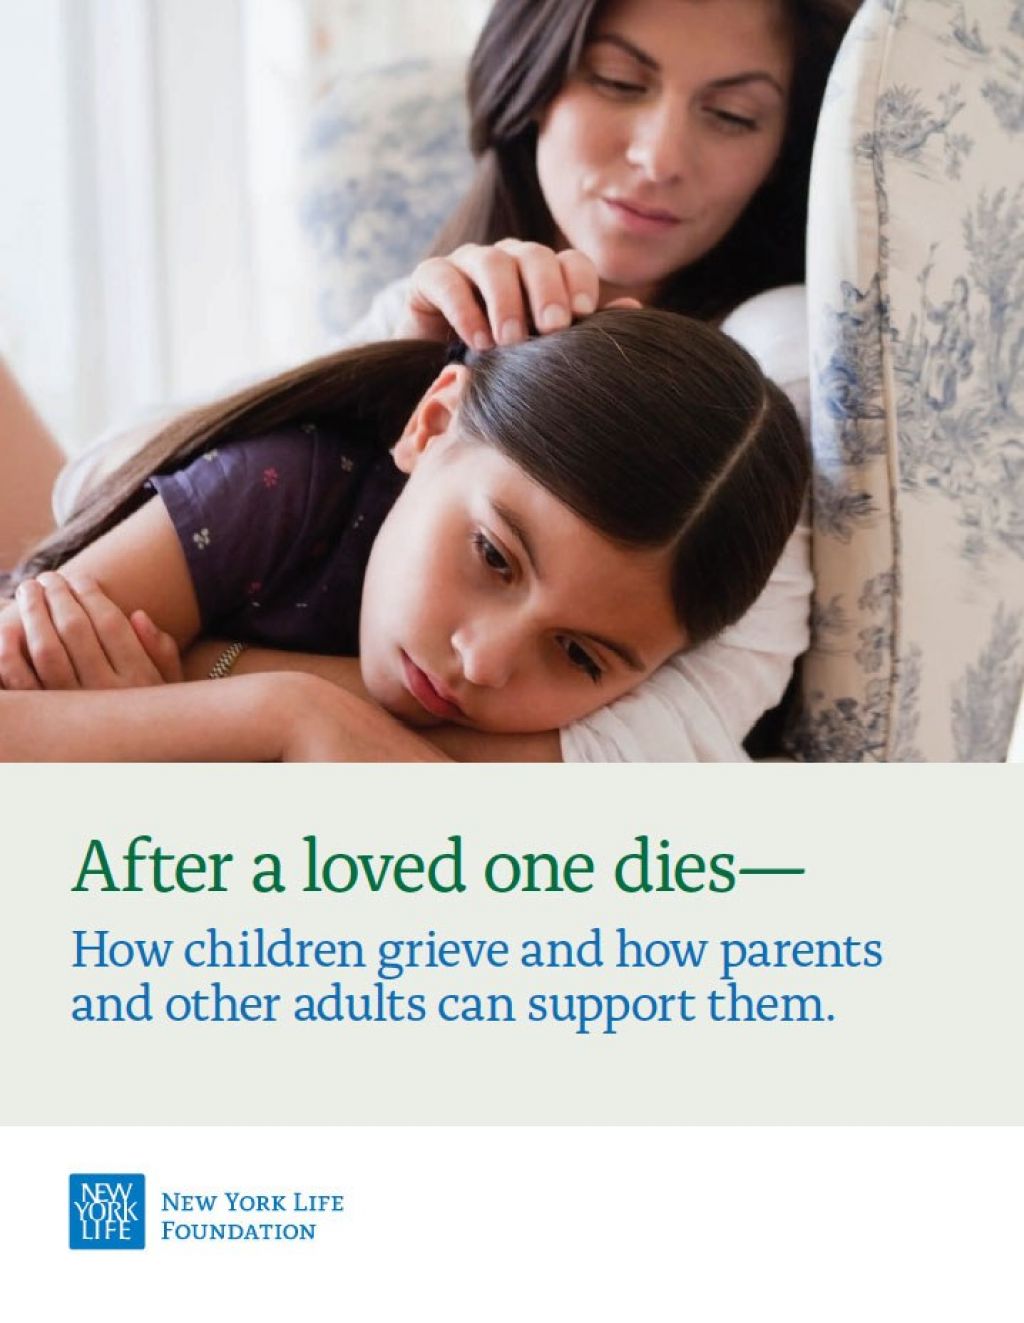 Image of a mother stroking the hair of her daughter who looks upset.  Title of the guide is "After a loved one dies - How children grieve and how parents and other adults can support them."